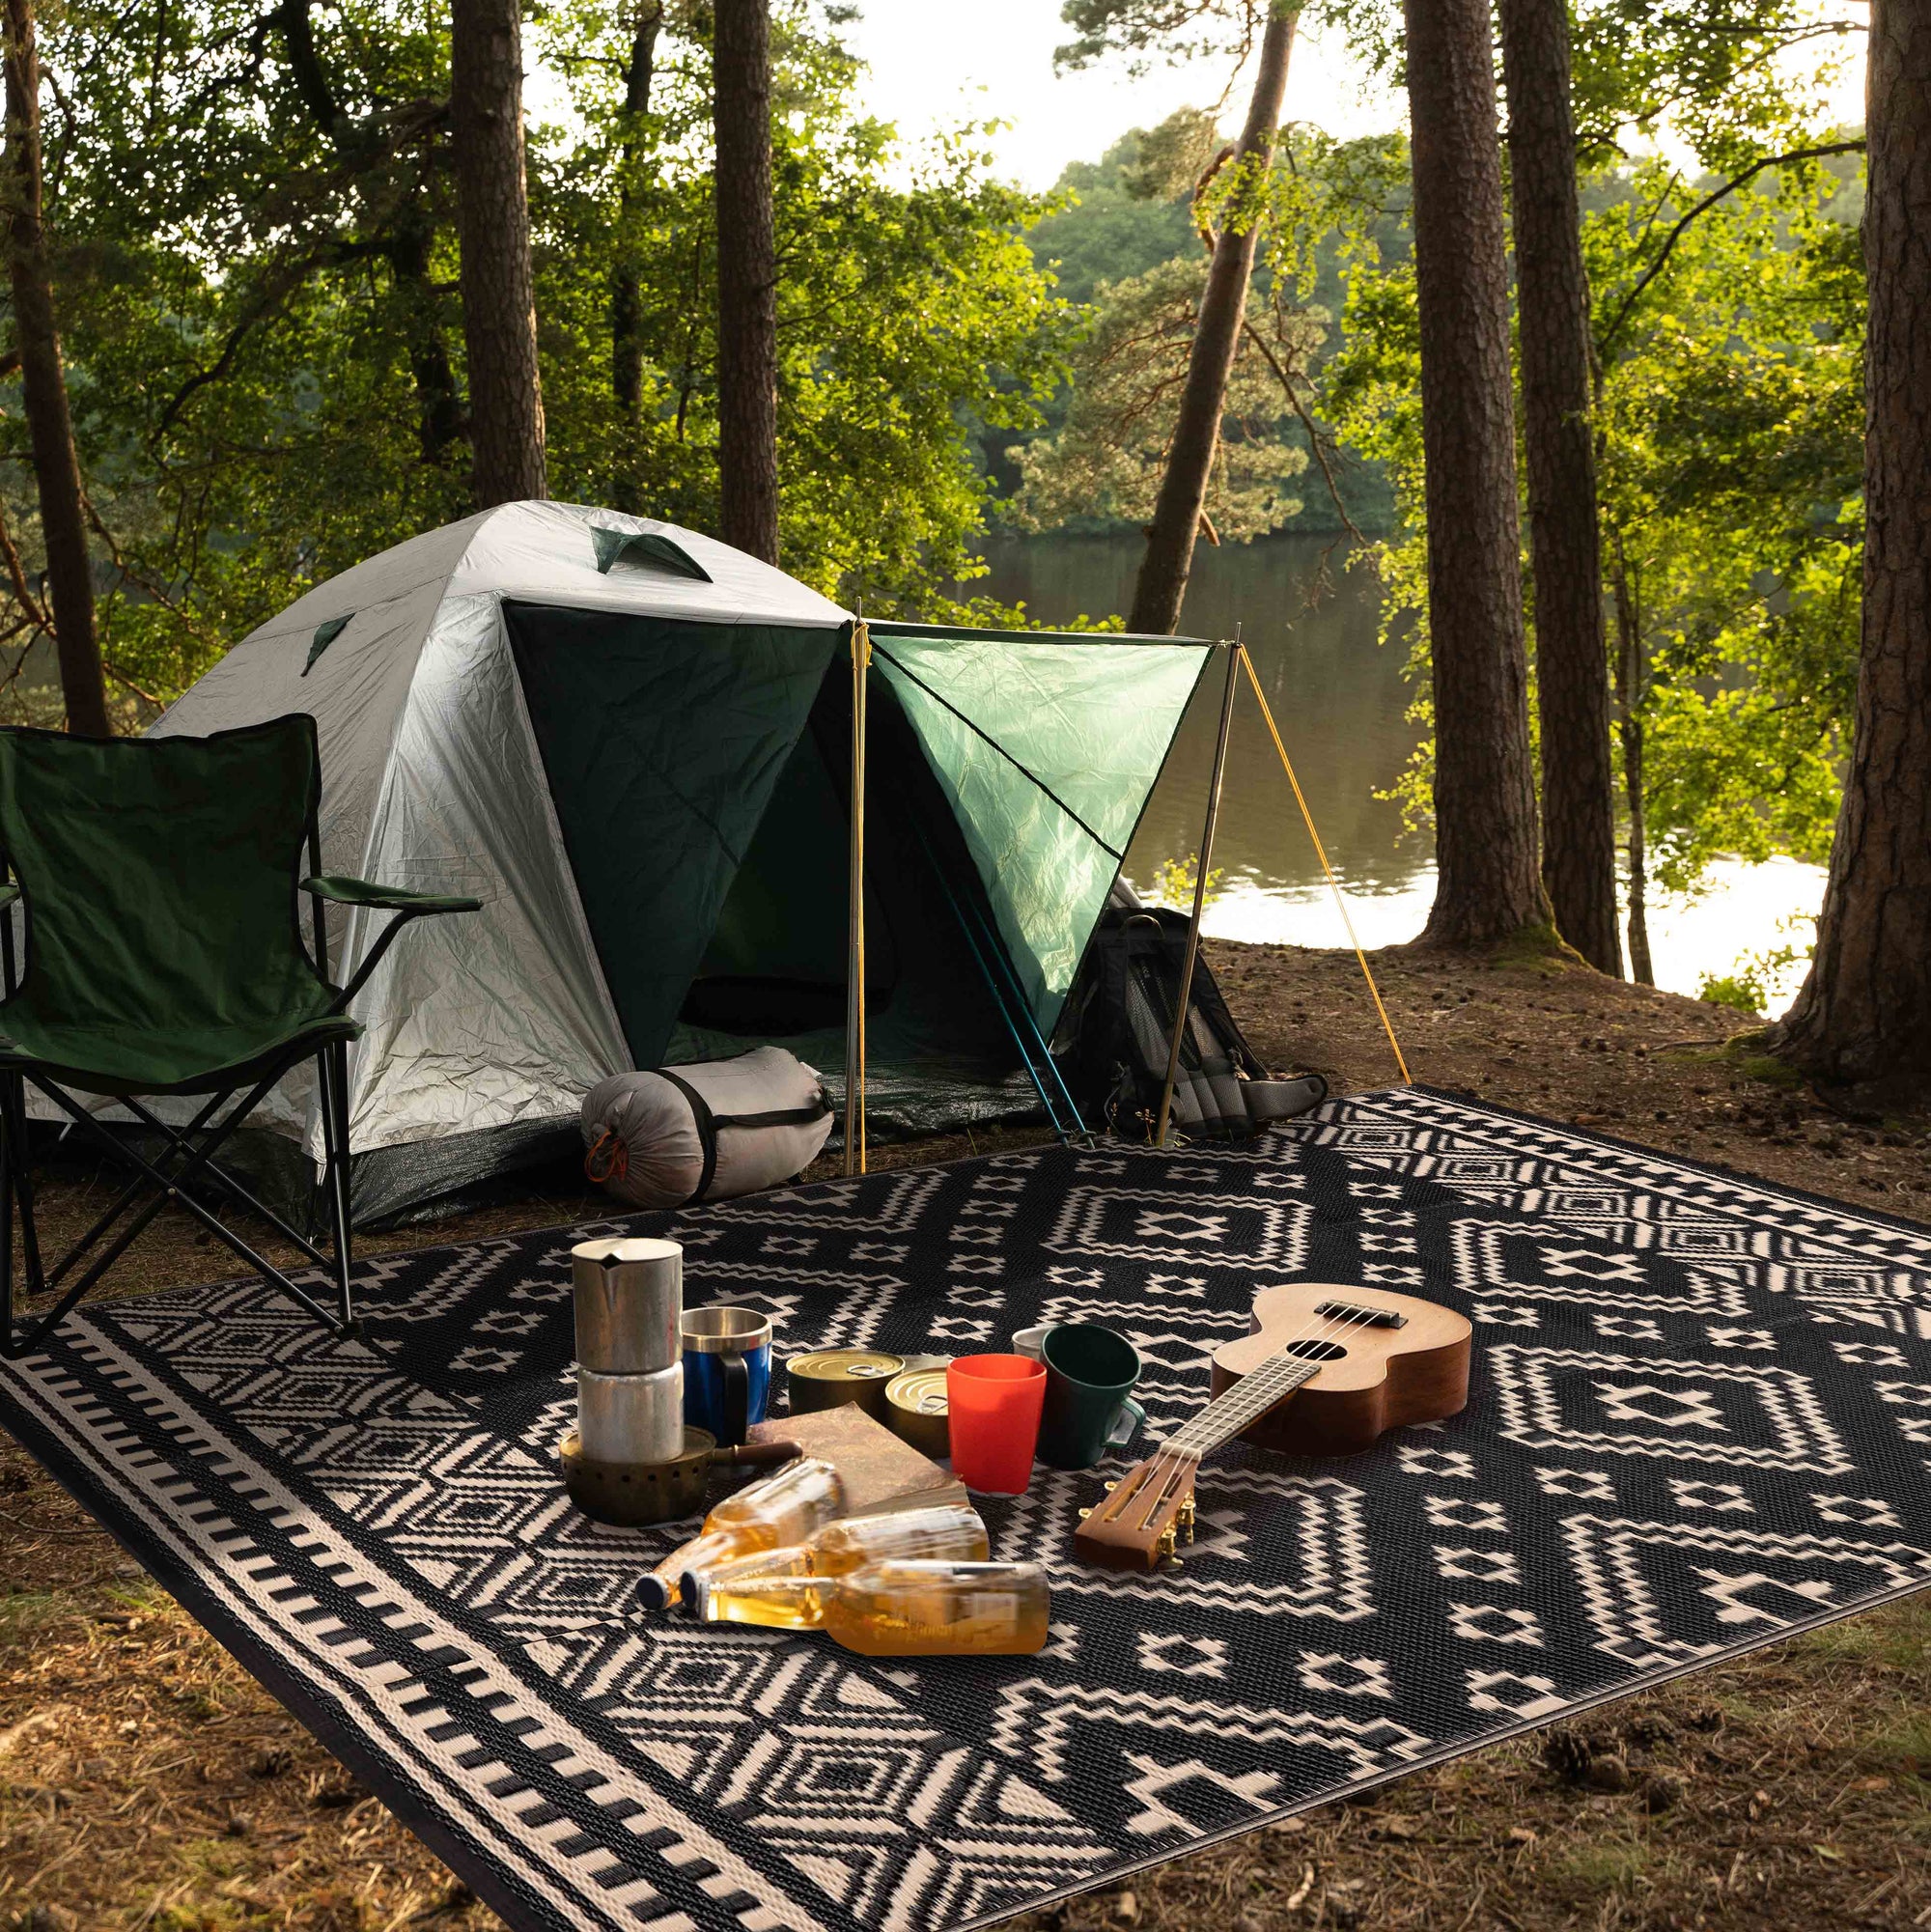 Venice Outdoor Recycled Plastic Rug for Camping (Black / Beige)